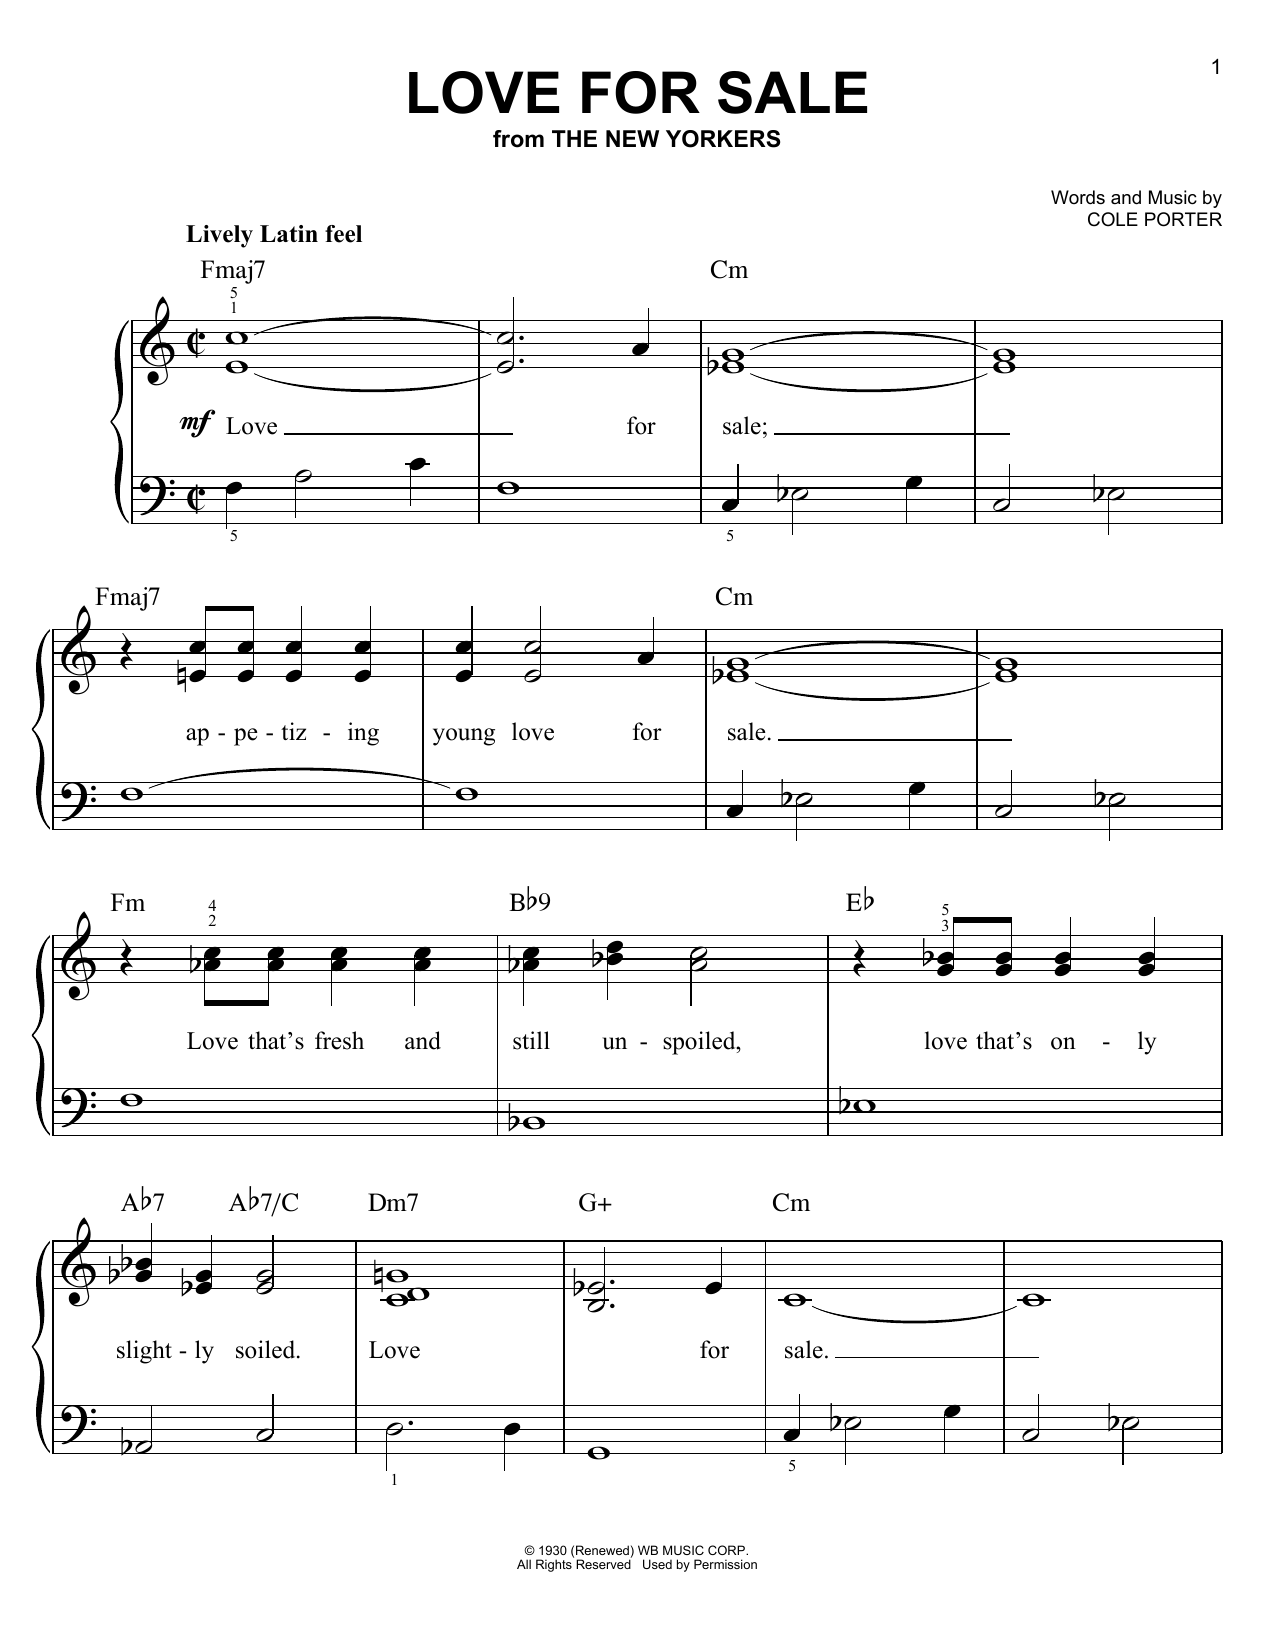 Cole Porter Love For Sale sheet music notes and chords. Download Printable PDF.